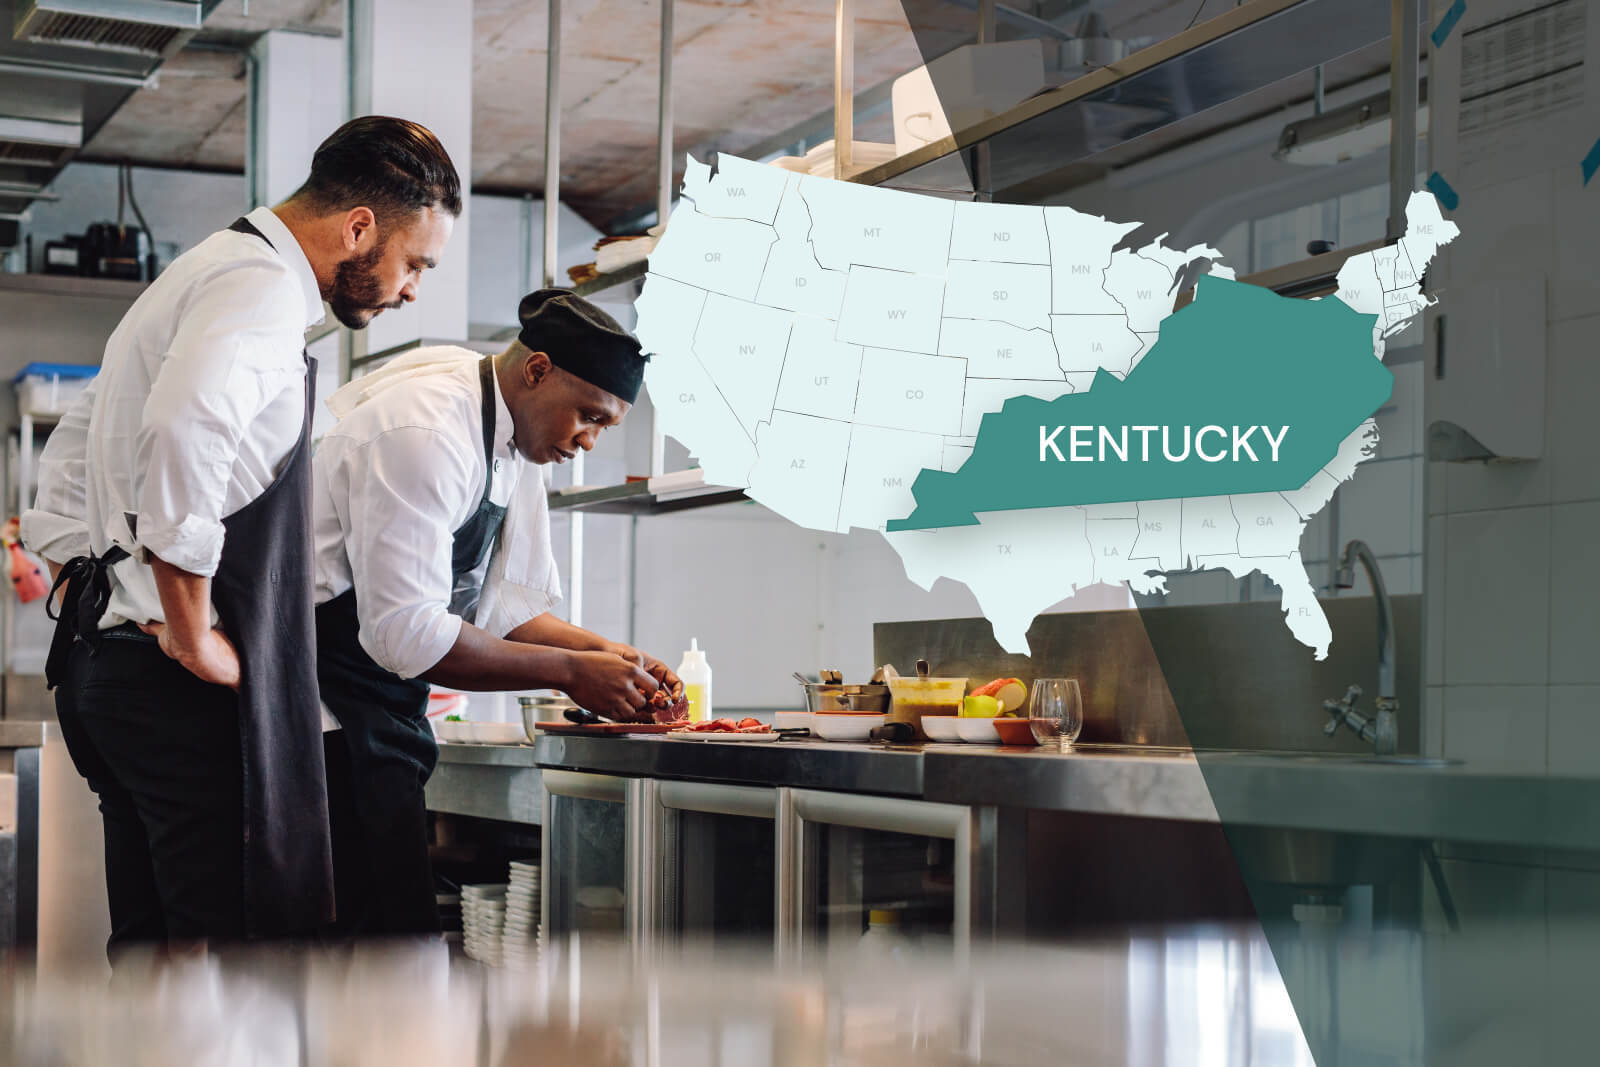 Kentucky Food Safety: Comparing the FDA and Kentucky Food Codes